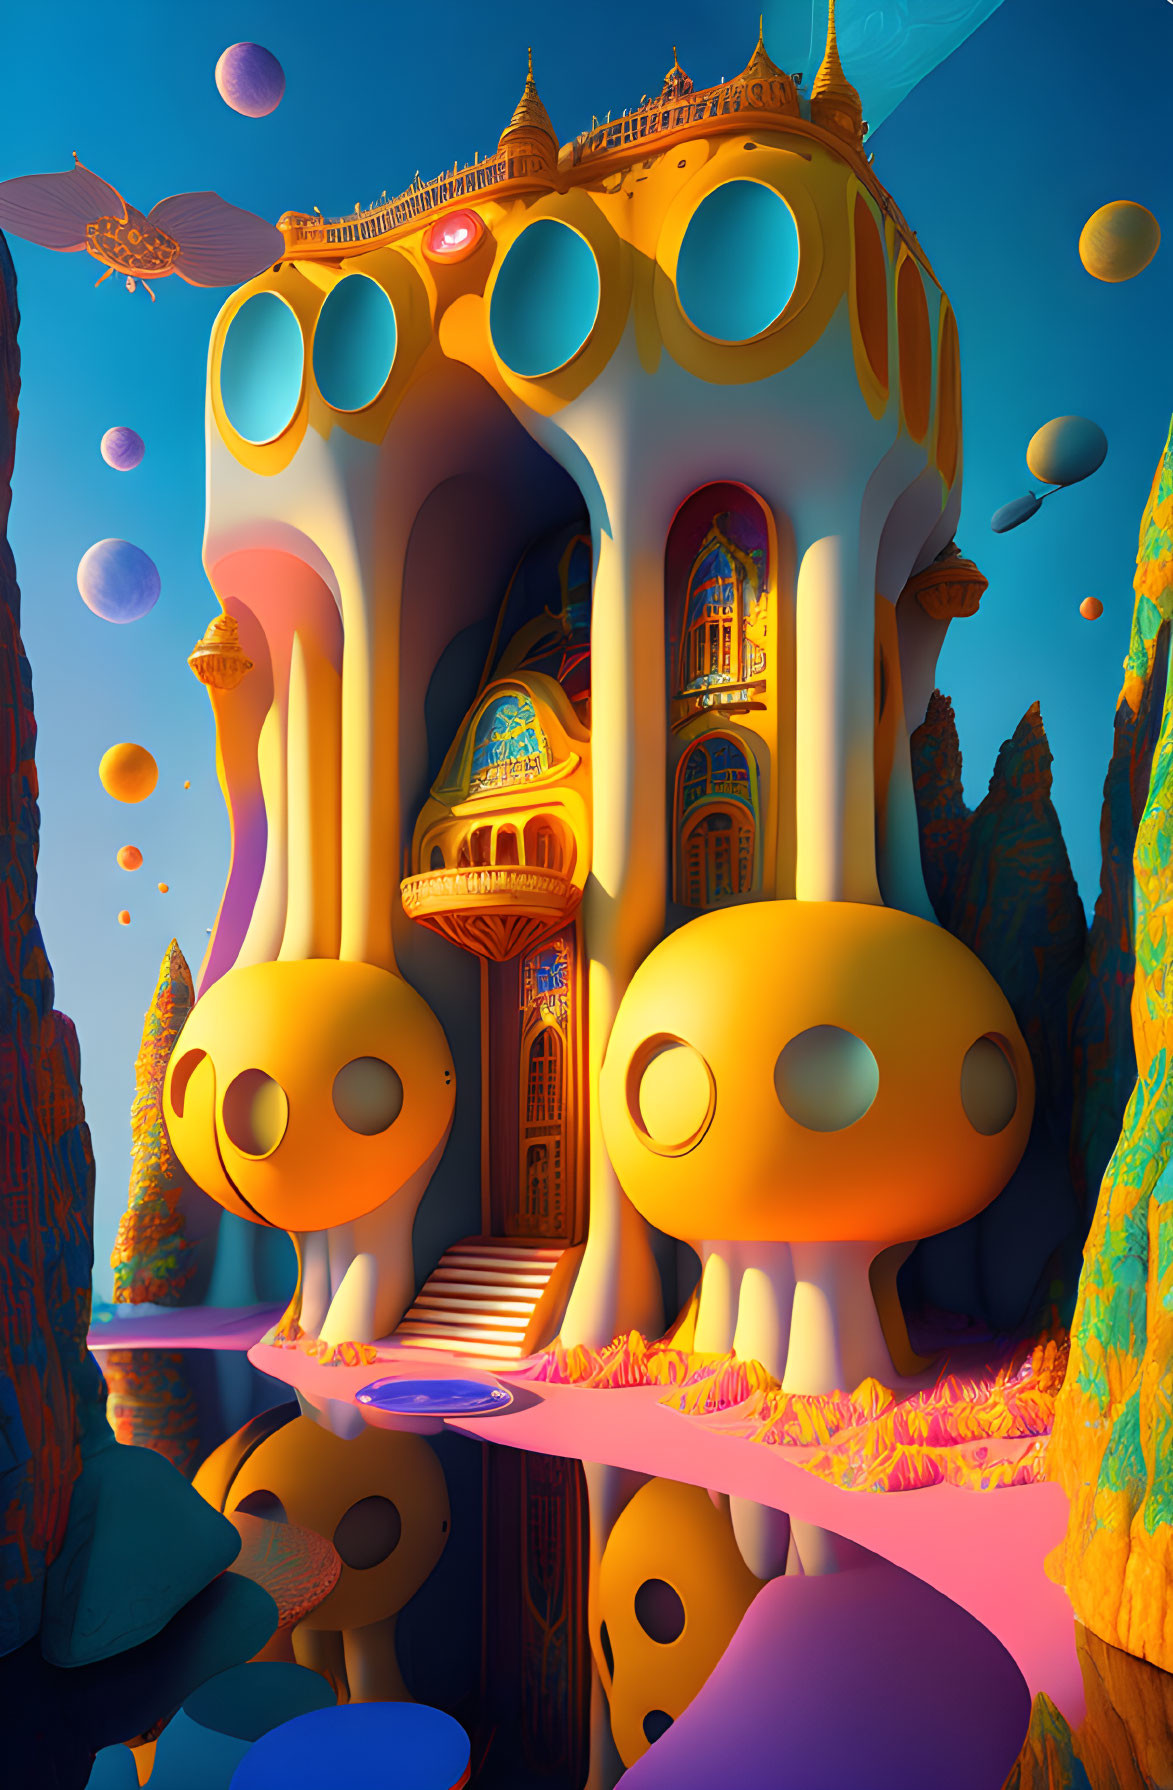 Colorful surreal artwork with golden domes, floating orbs, and rock formations under a blue sky